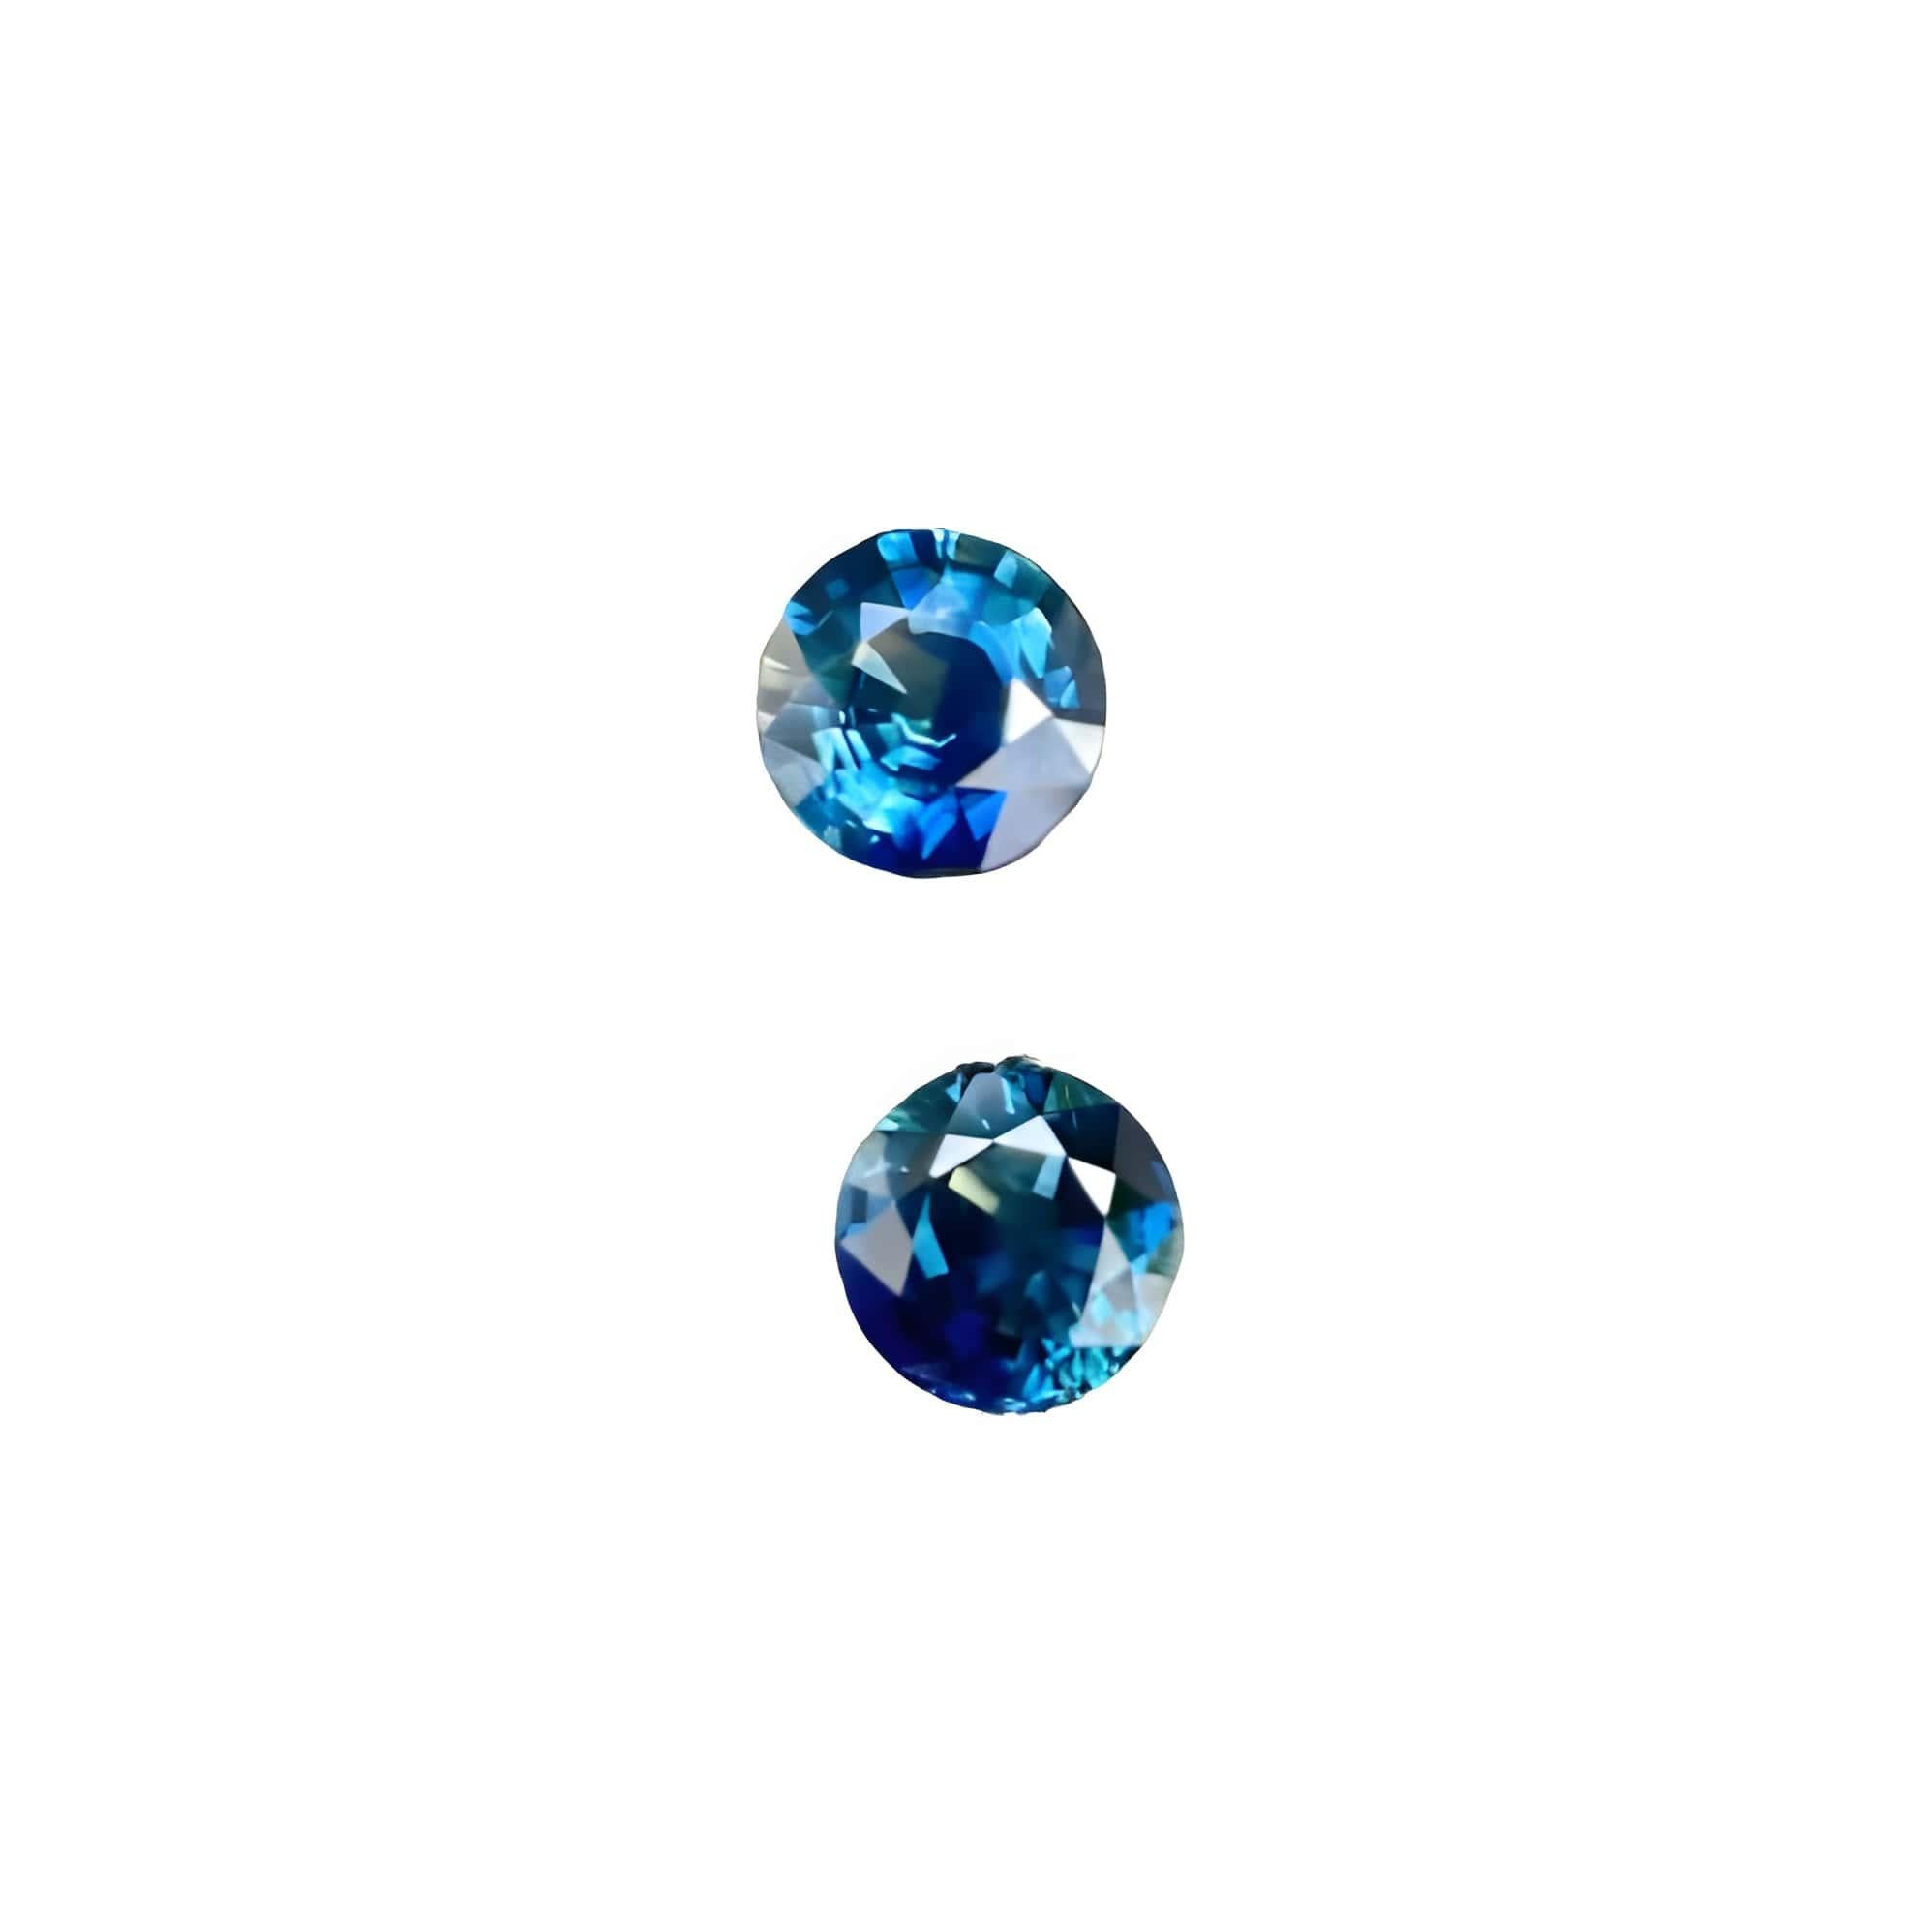 Women's or Men's 2.01 carats Teal Blue Sapphire Pair Round Cut Natural Madagascar's Gemstone For Sale